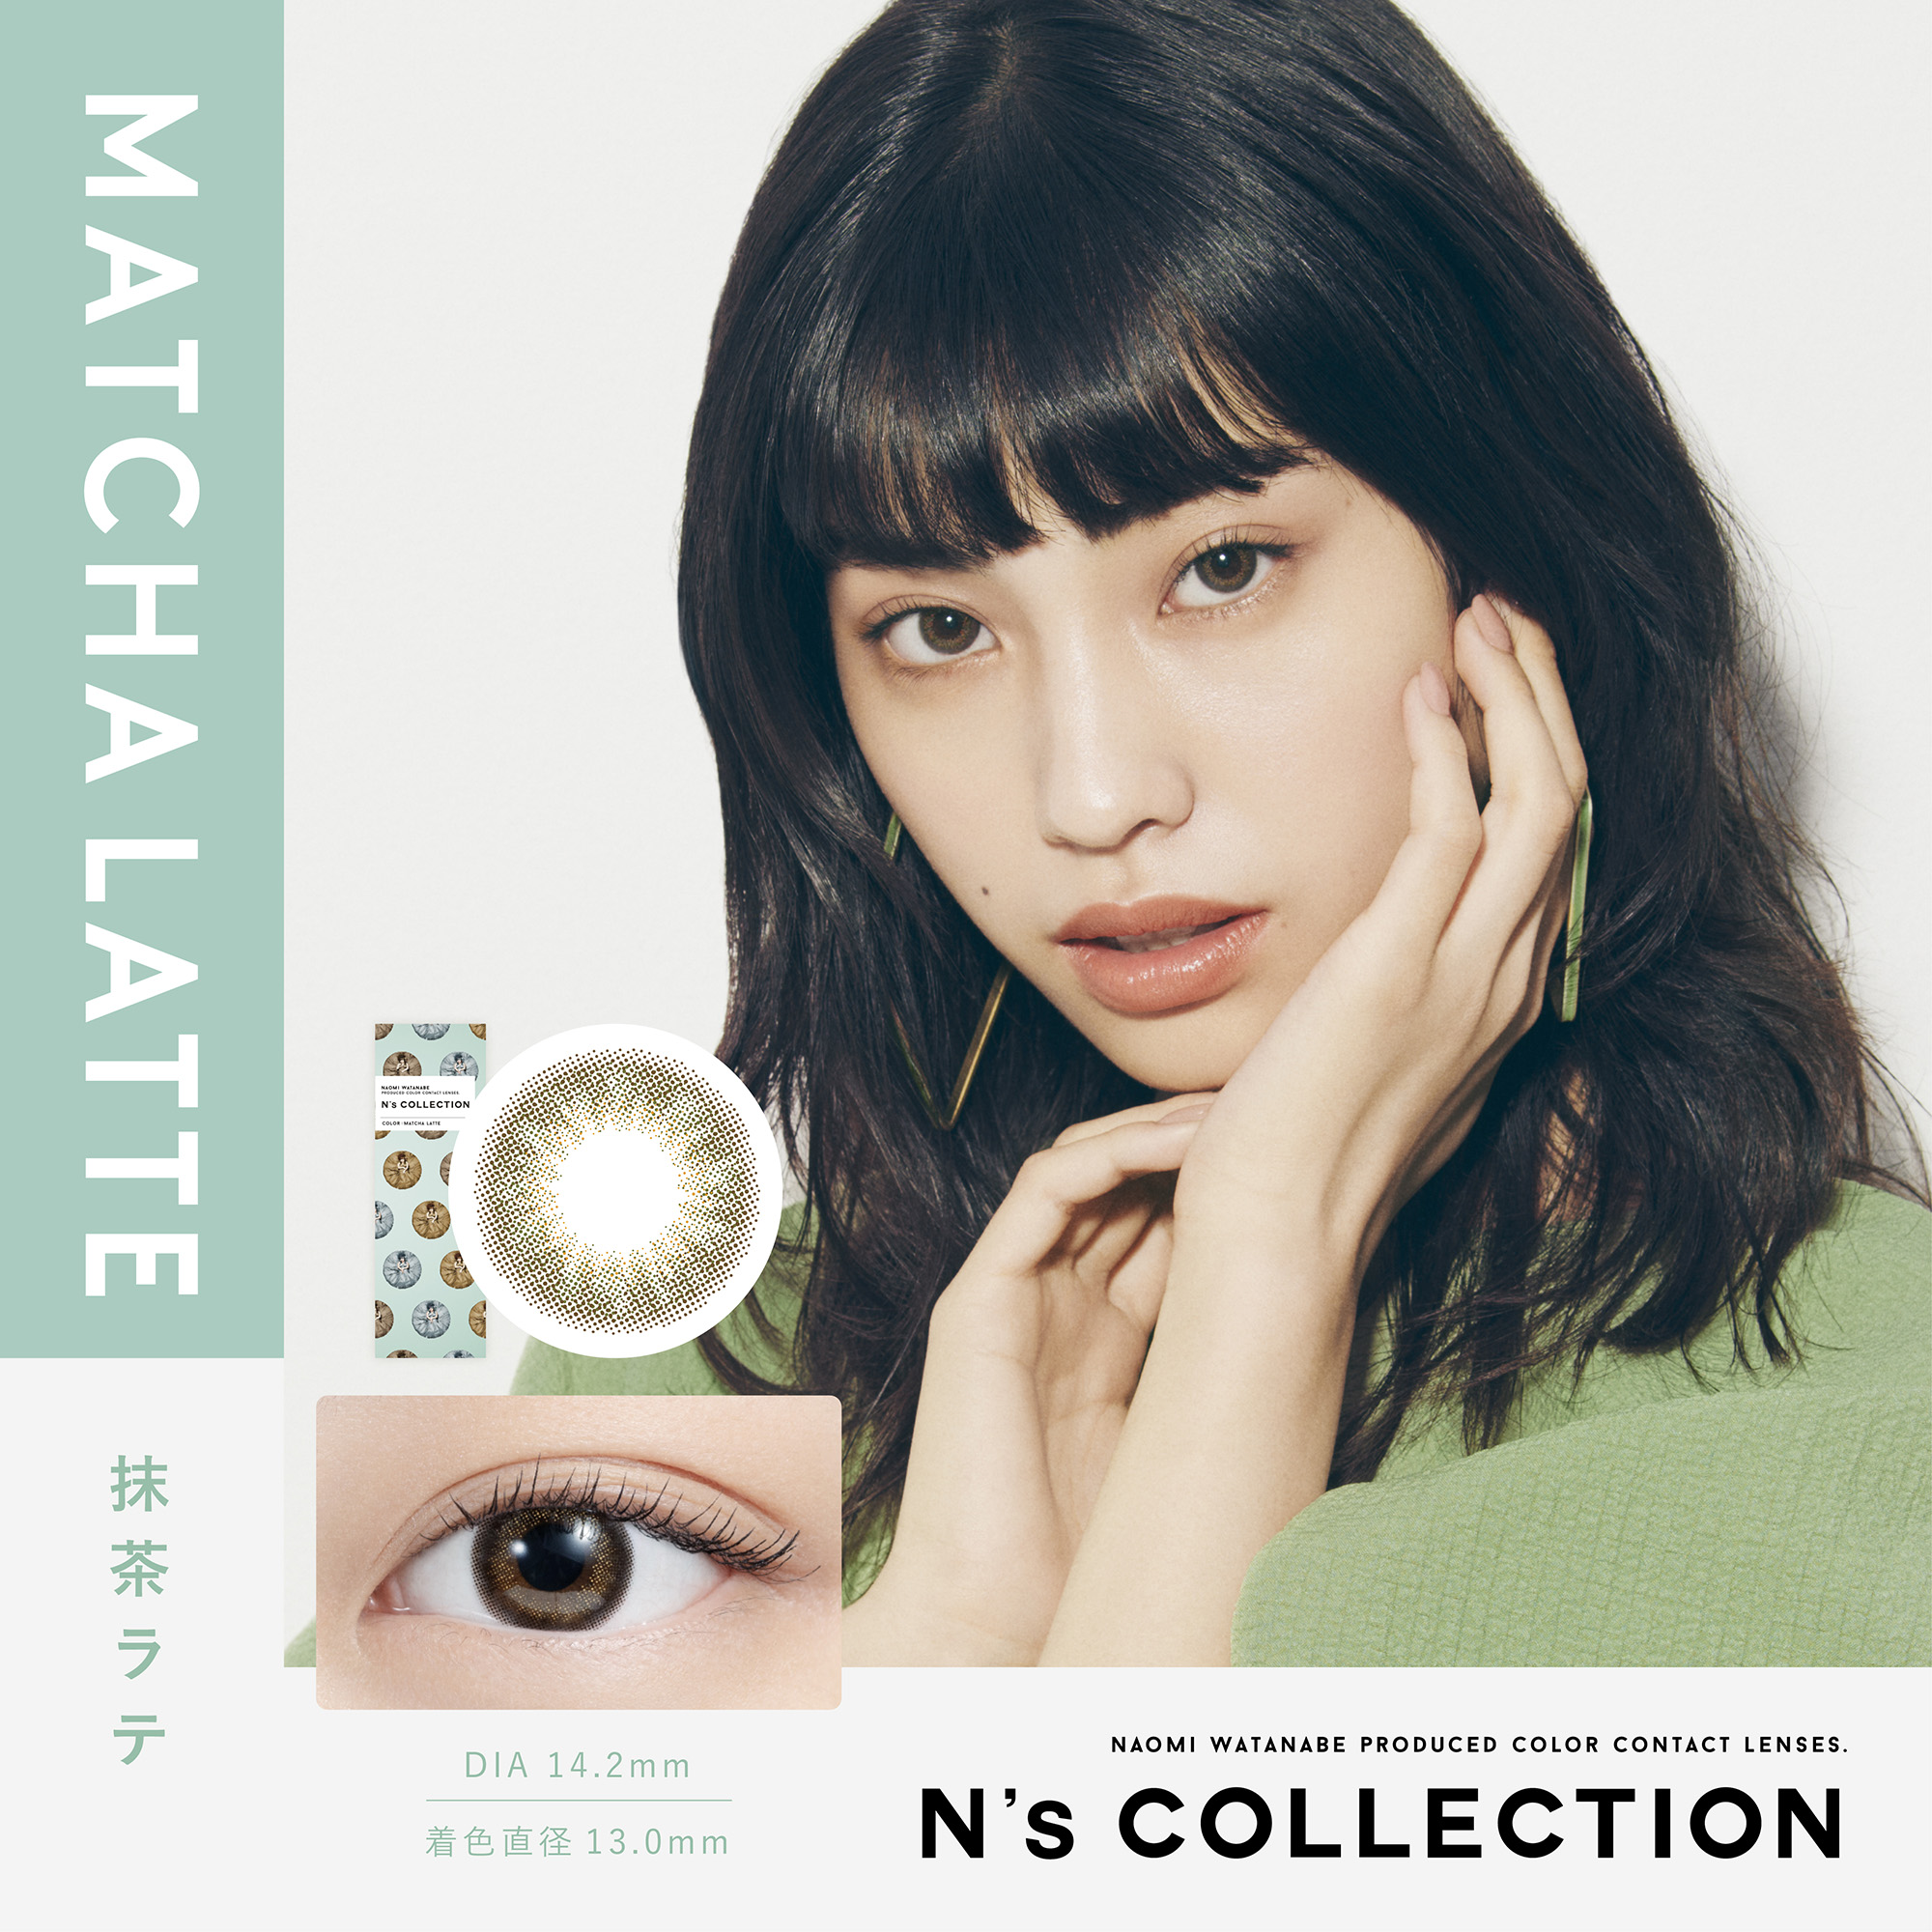 N's collection（エヌズコレクション）抹茶ラテ